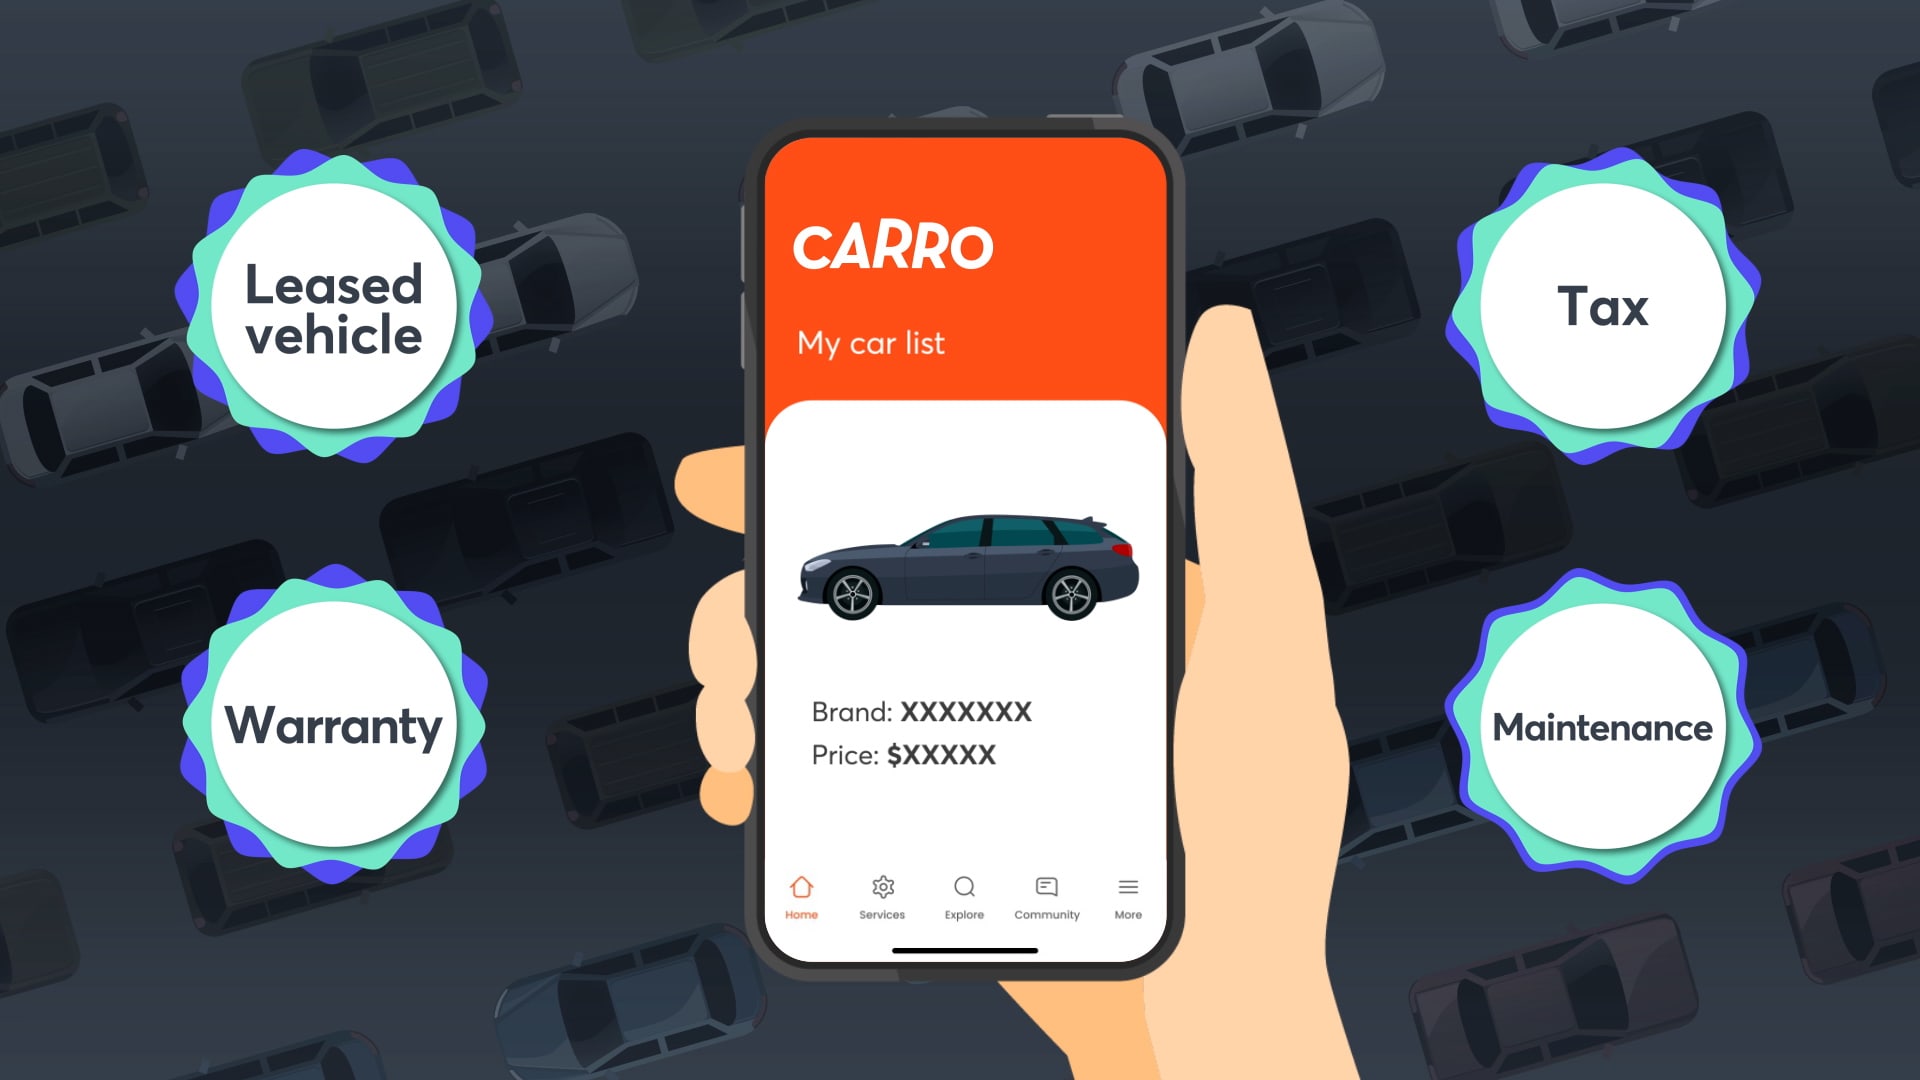 Autos marketplace Carro launched Singapore's first car subscription service in 2019.